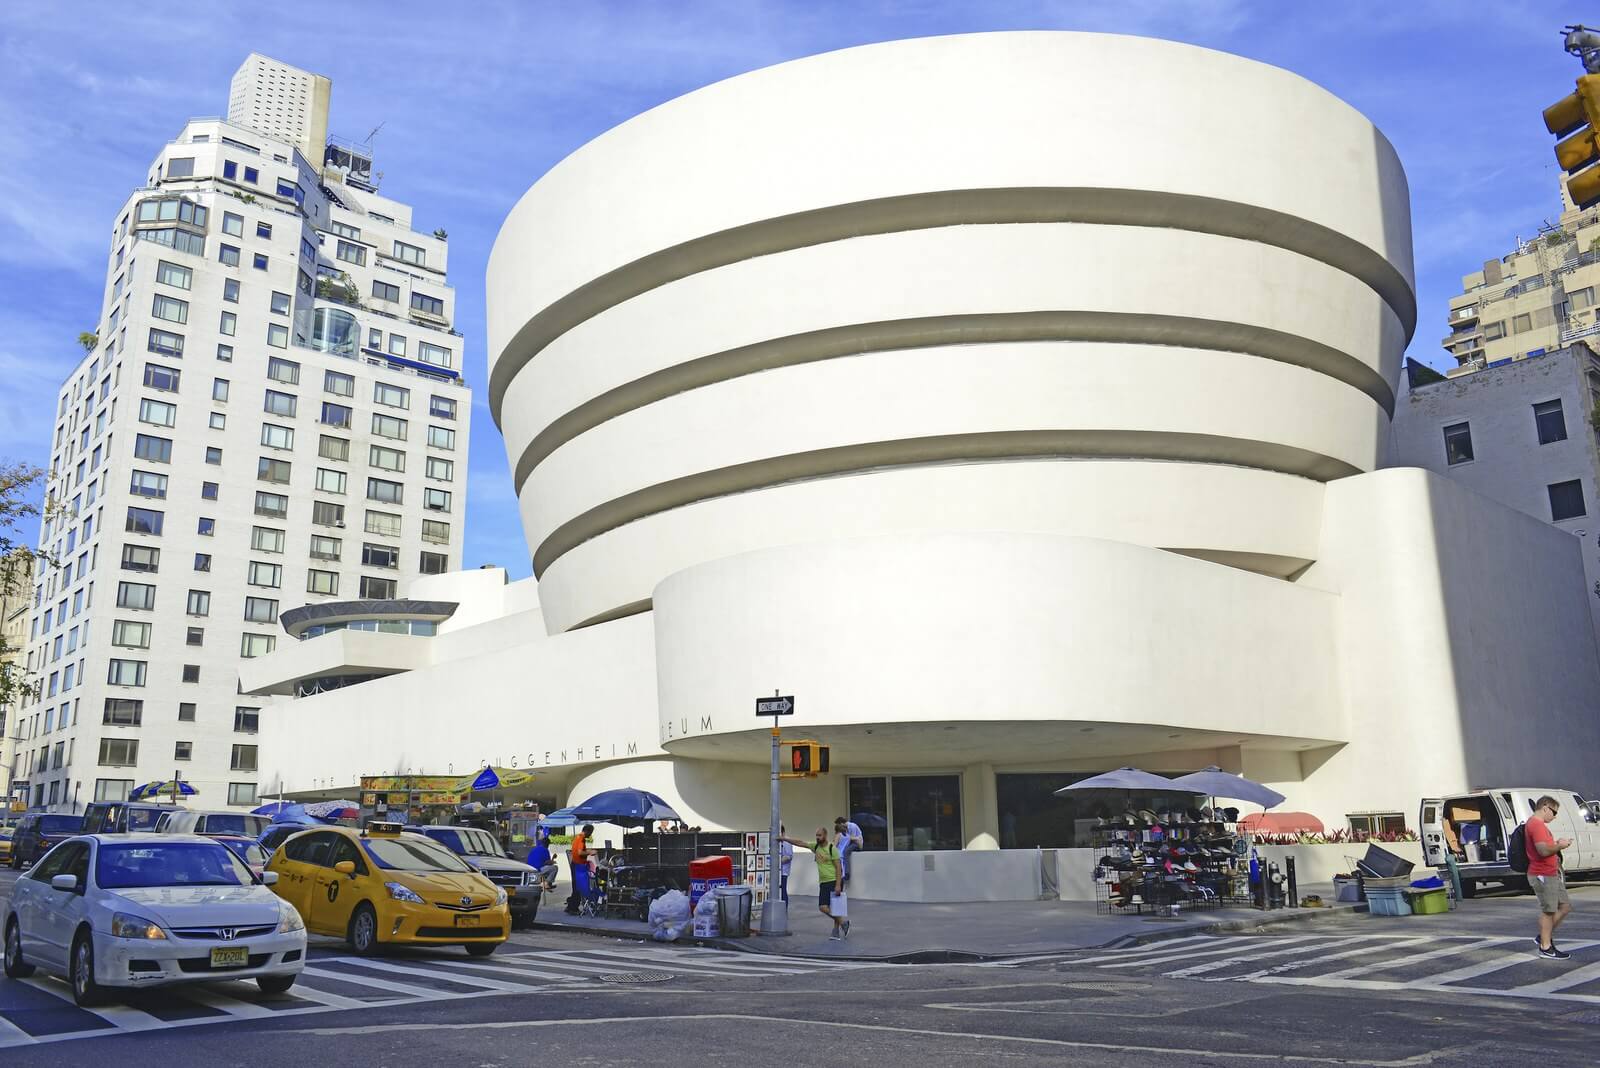 most provocative museum buildings around the world 